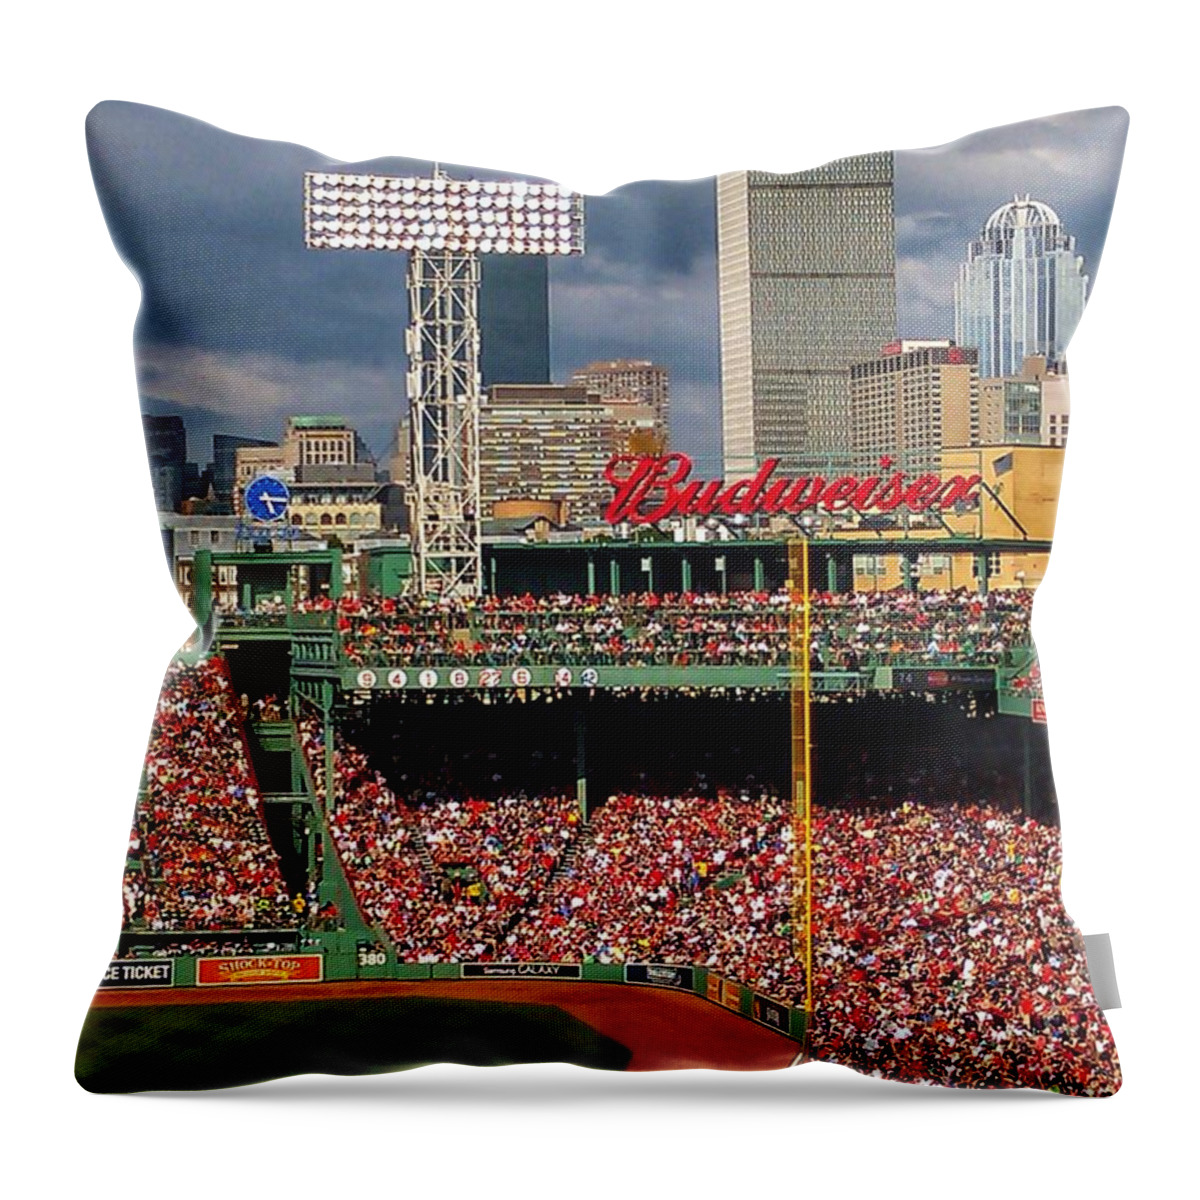 Fenway Park Throw Pillow featuring the photograph Peskys Pole at Fenway Park by Mary Capriole